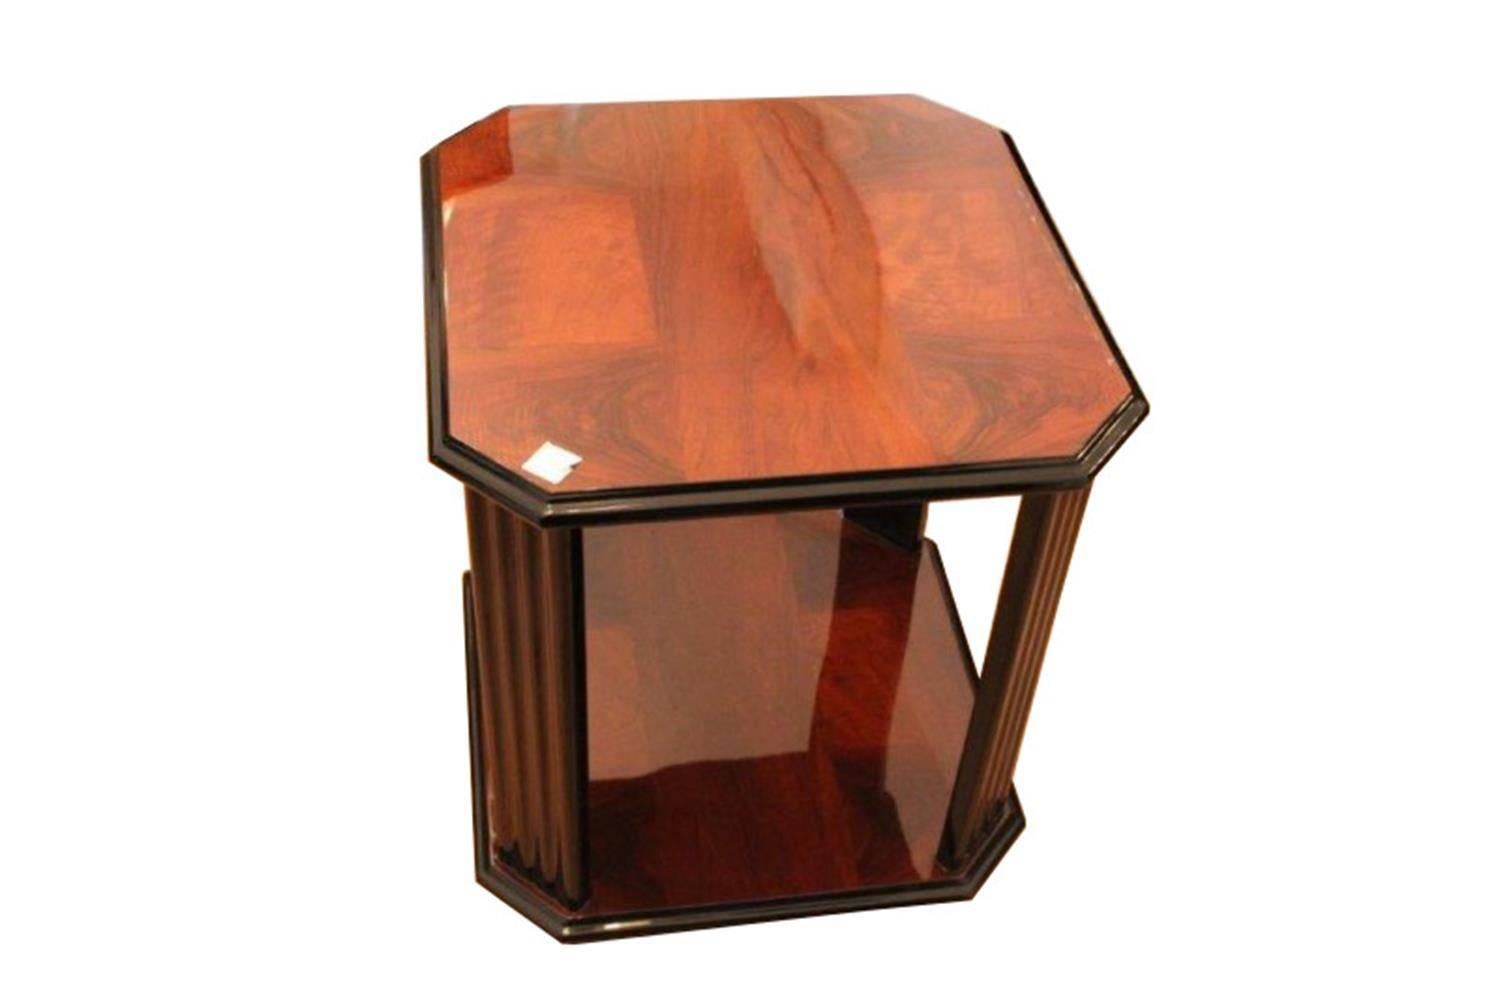 Beautiful side table from France of the 1930s. This piece of furniture convinces through its unique chess pattern veneer. The fluted legs are closing the elegant body language. Walnut wood on the top and bottom plate. Polished by hand after the